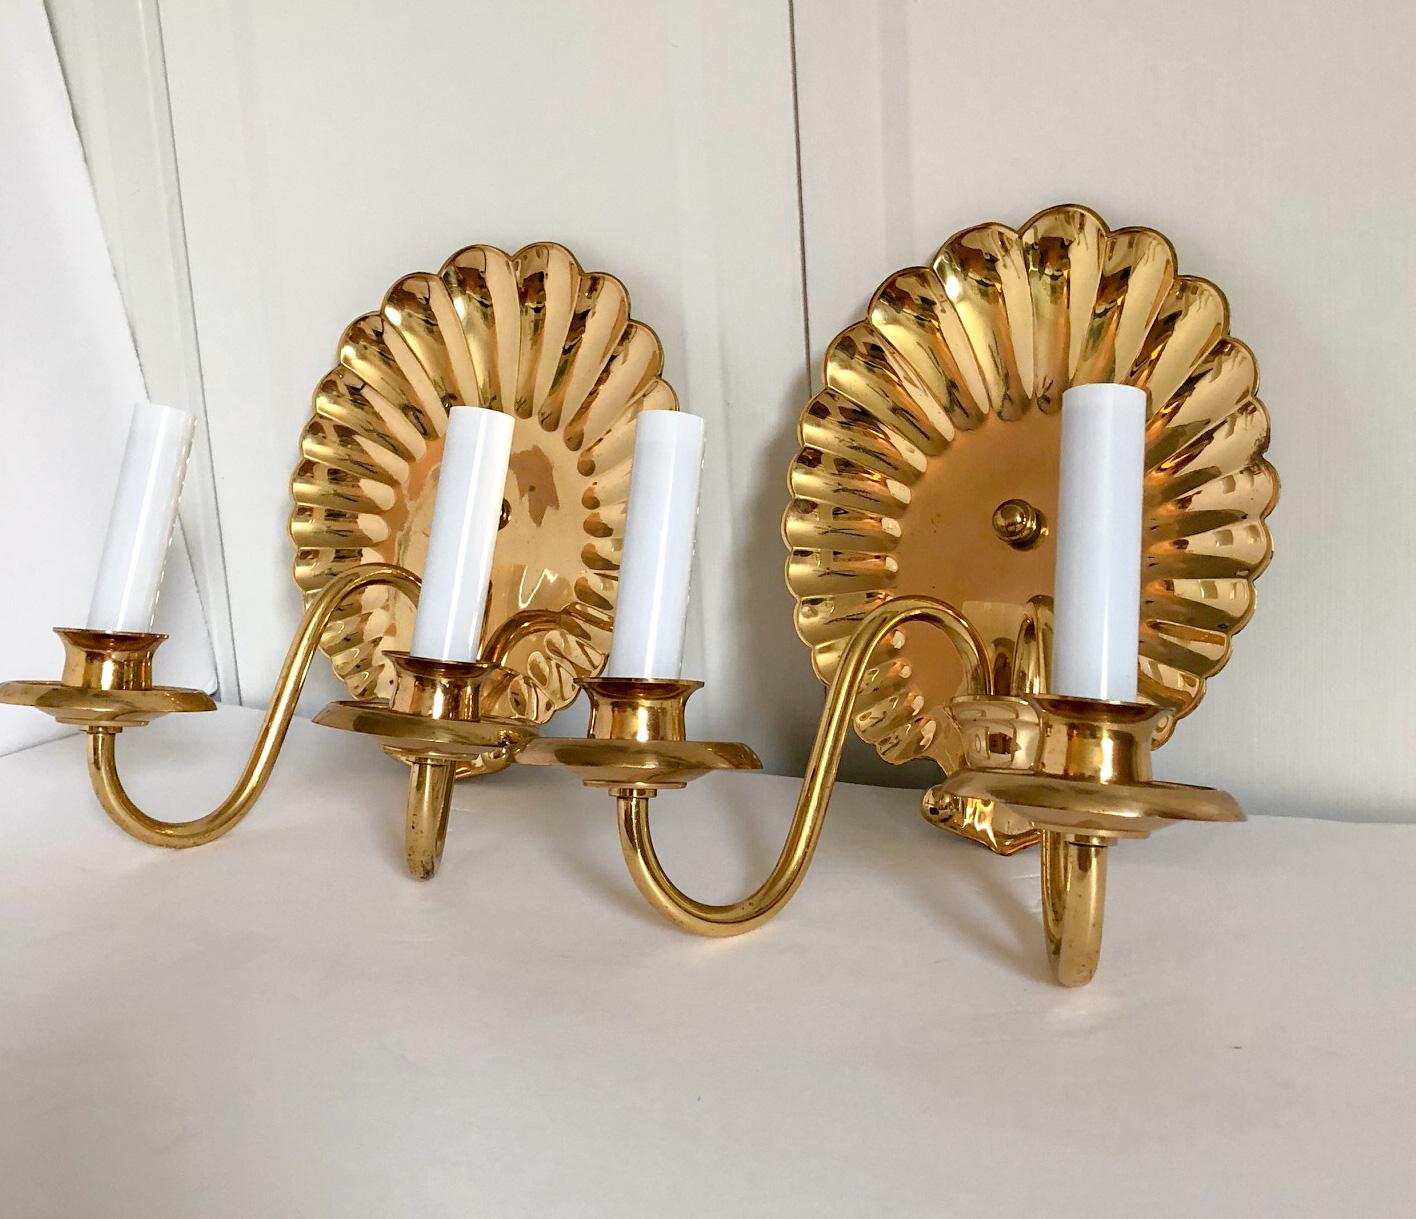 Handsome pair of vintage solid brass shell-motif escutcheon wall sconces with double arms. The candle sleeves are new. Includes mounting plate for hardwiring. Original wiring in working condition; a 40 W chandelier bulb is recommended for each arm.